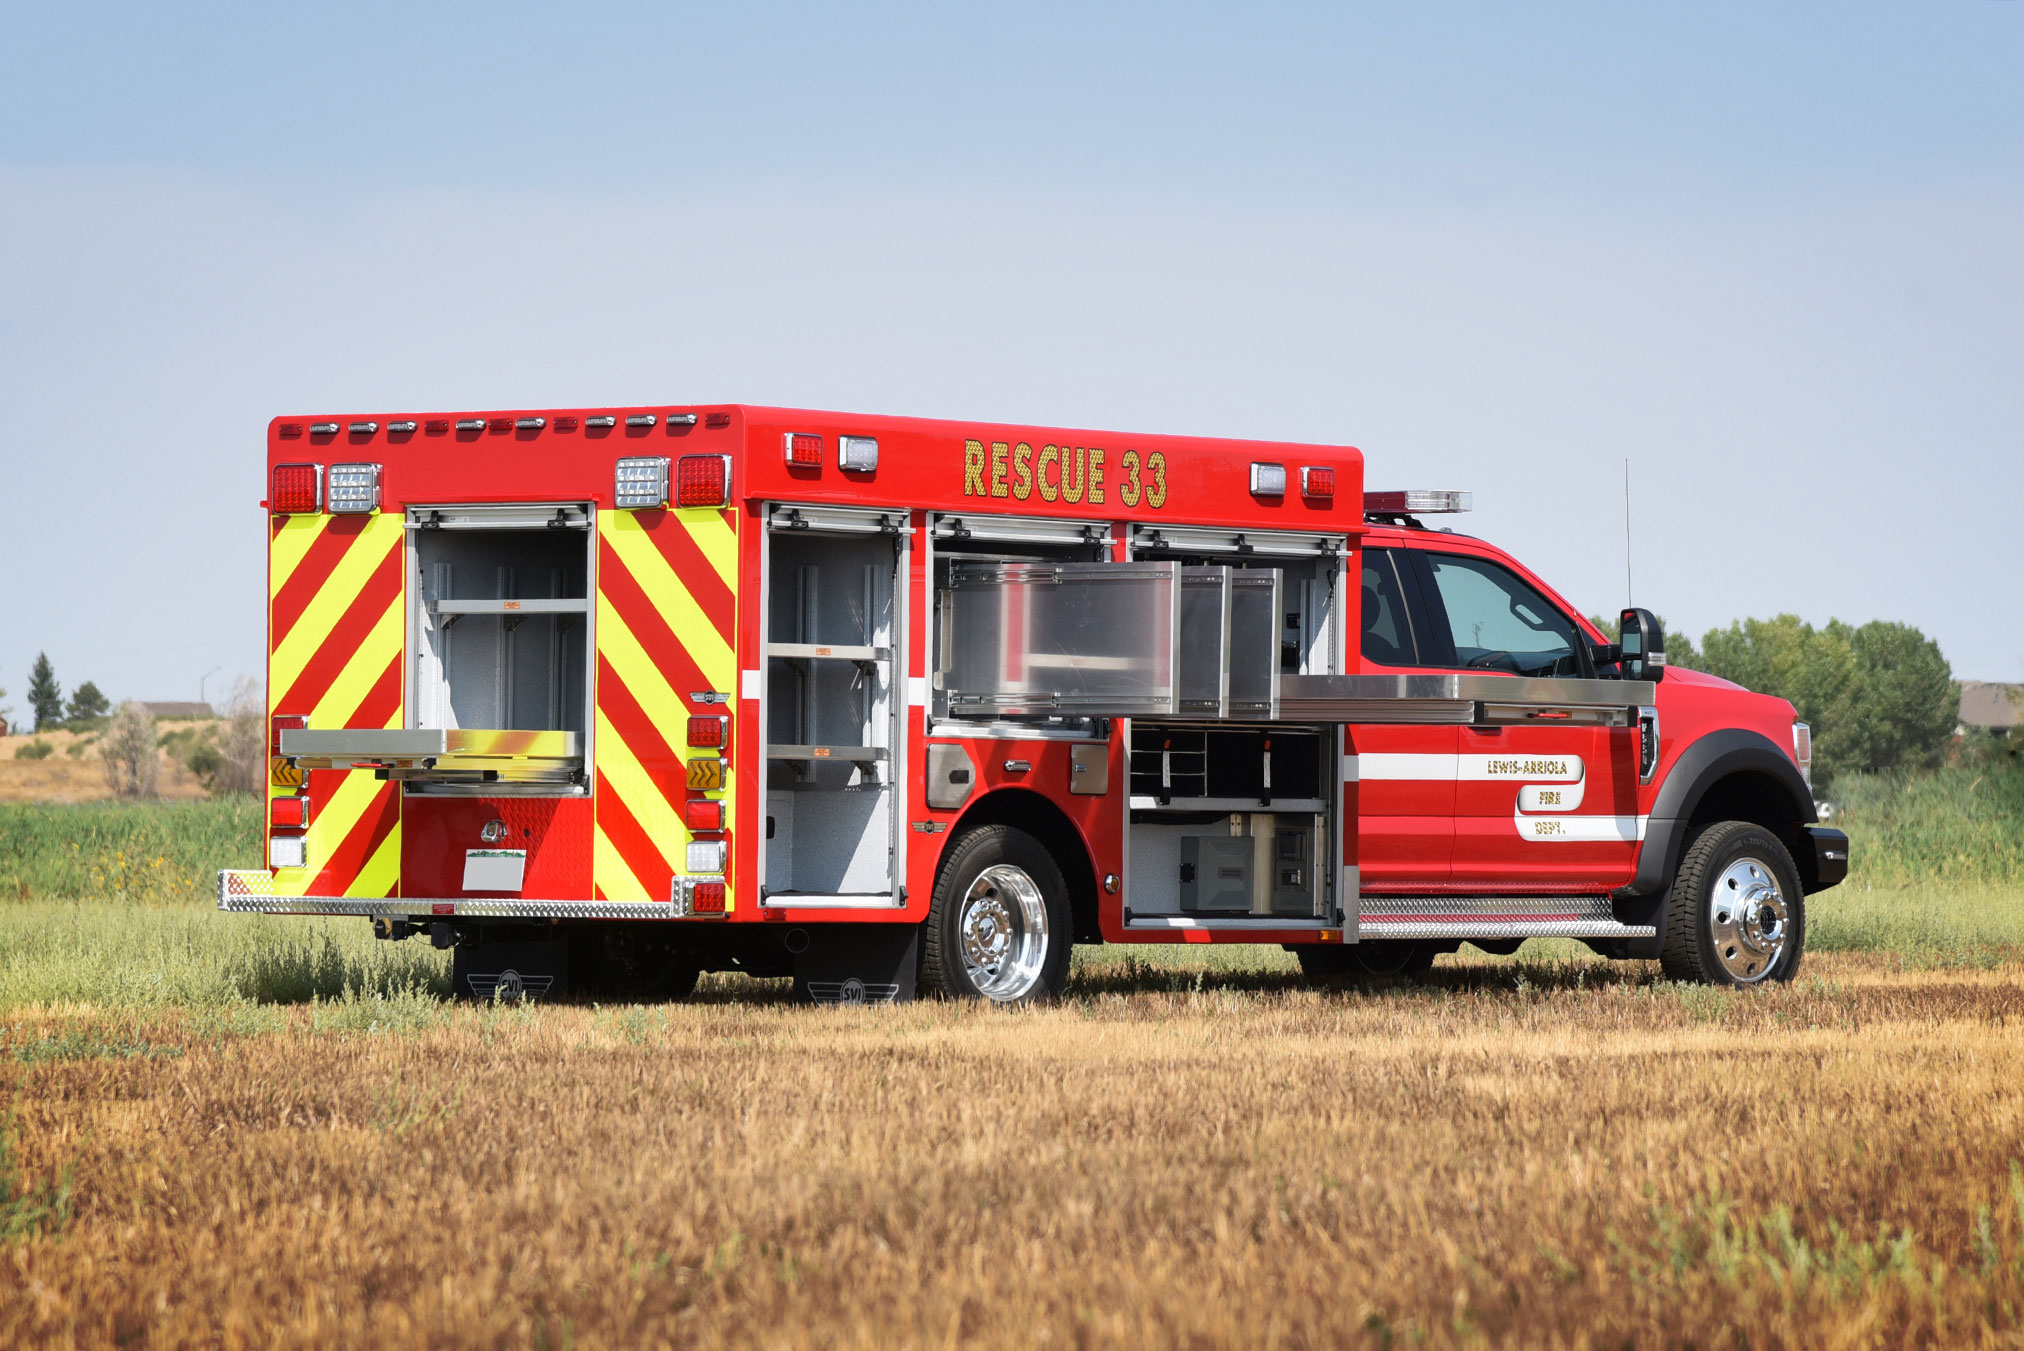 Featured image for “Lewis-Arriola, CO Light Rescue #1127”